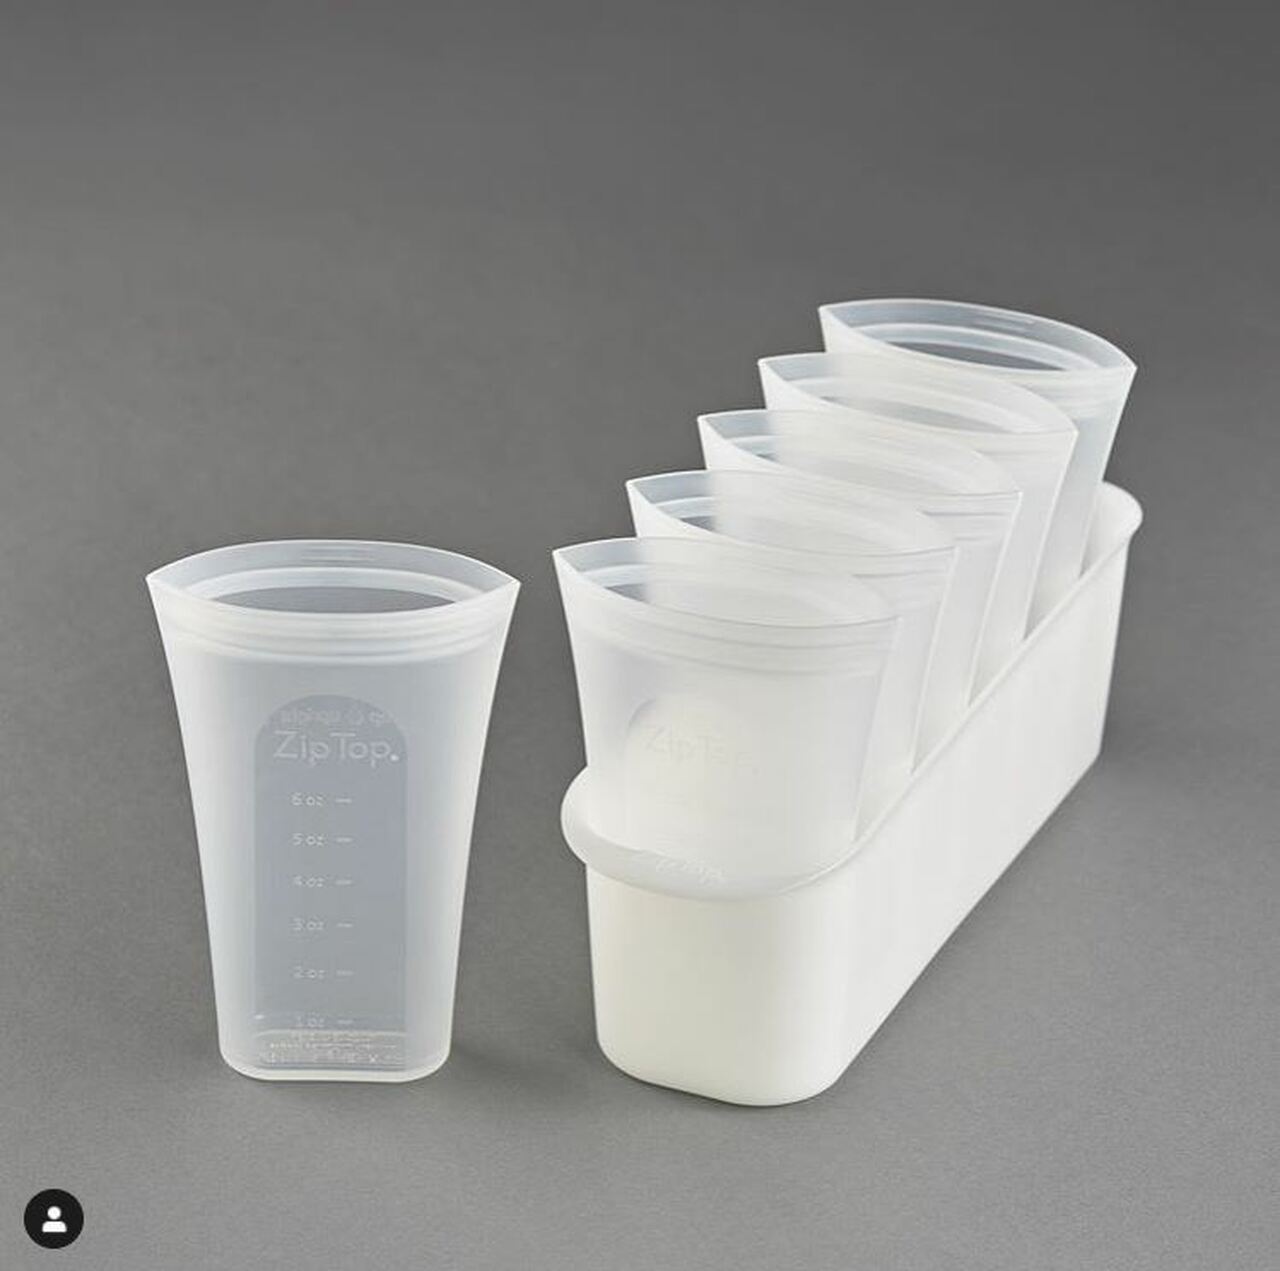 Zip Top Reusable Breast Milk Storage with Freezer Tray 100% Platinum Silicone, Bag Set of 6 - ANB Baby -$50-$75